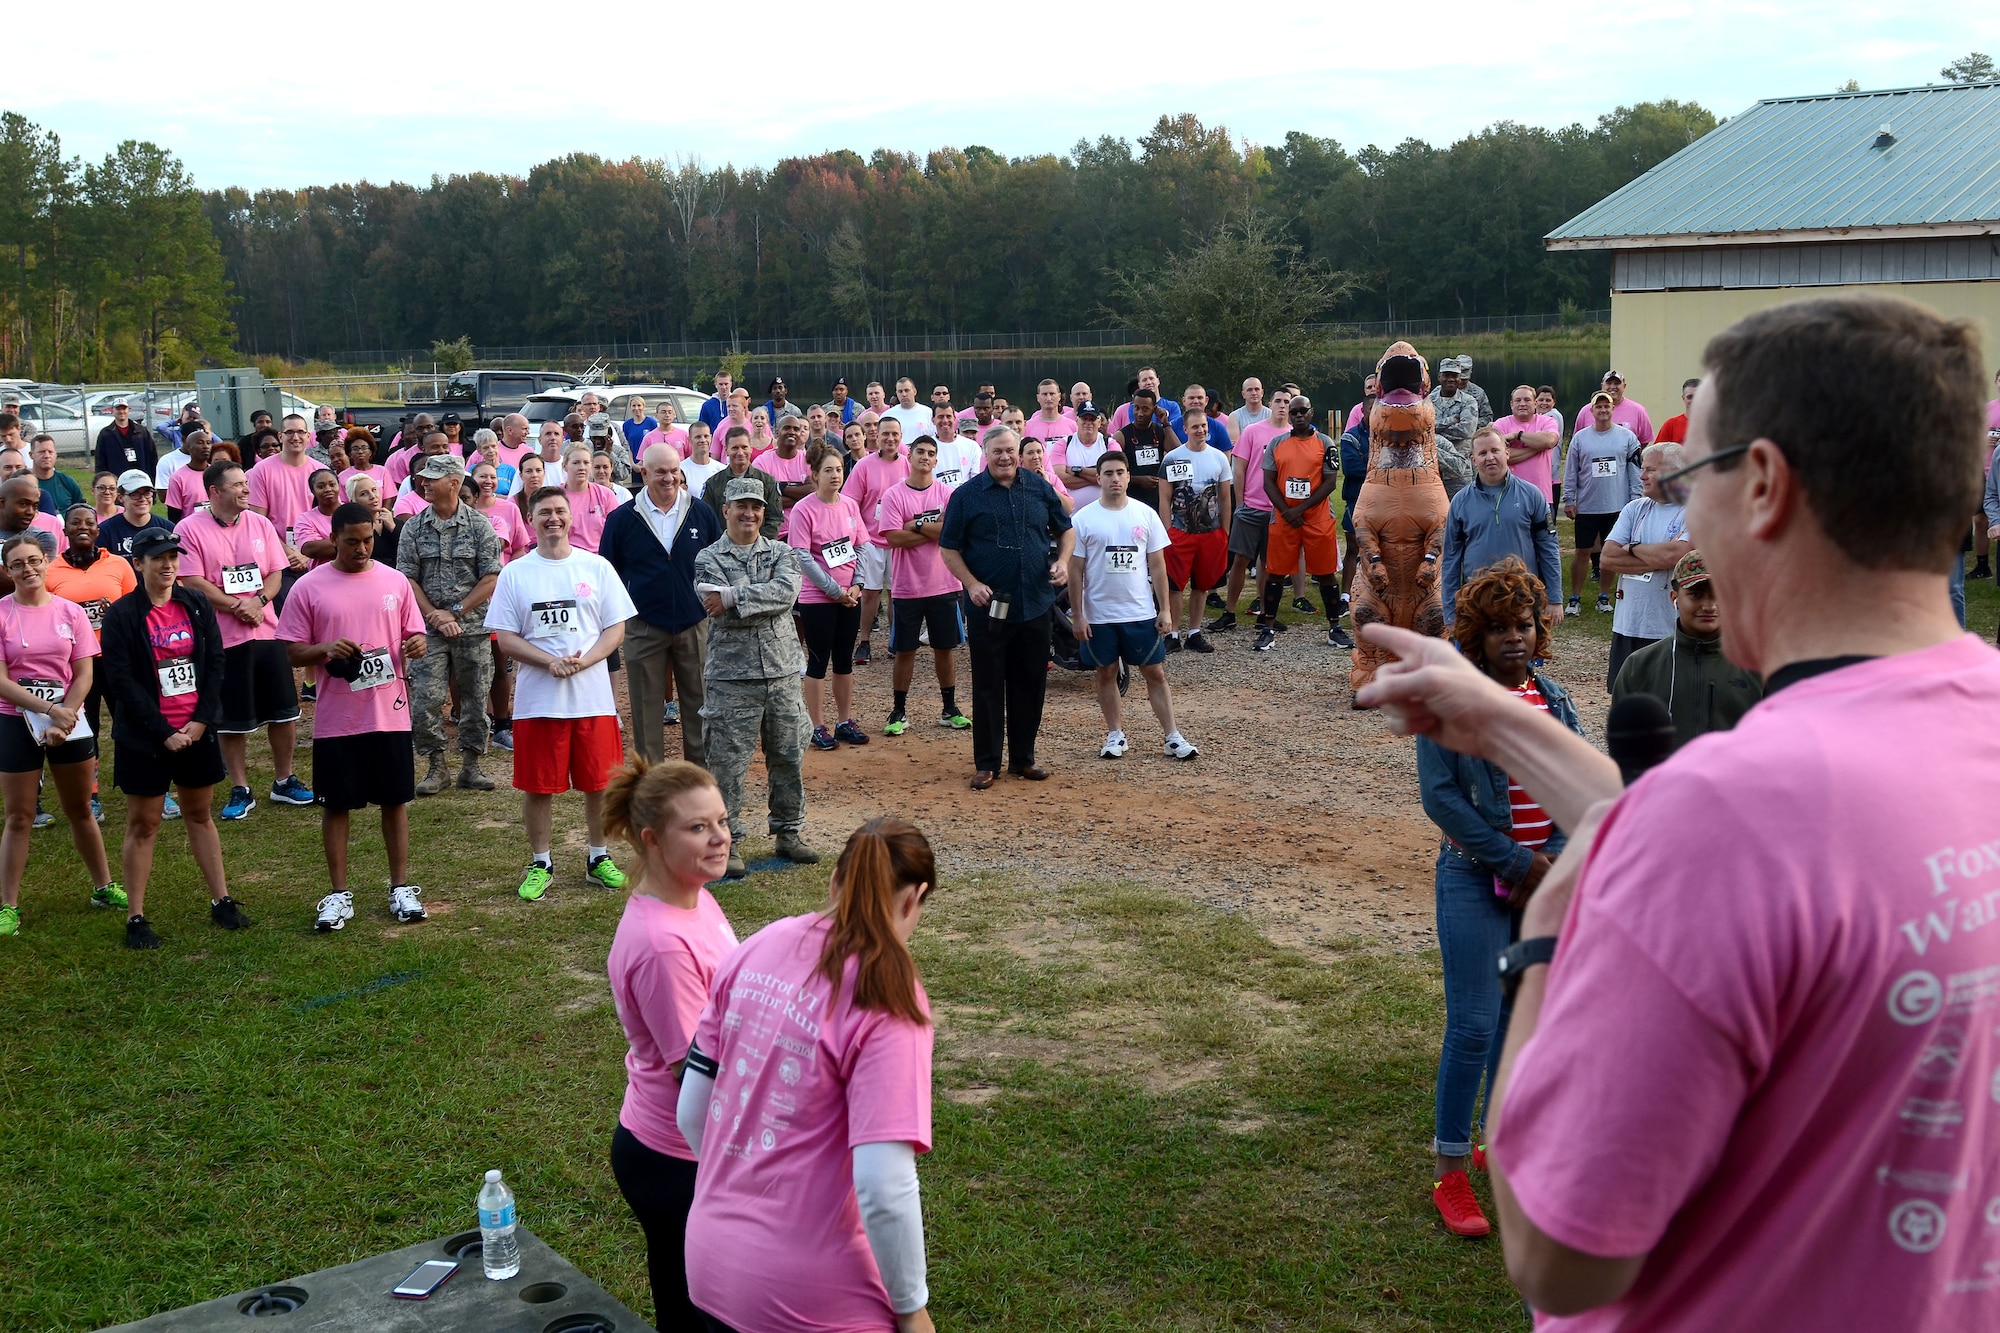 U.S. Air Force Col. Nick Gentile Jr., the commander of the 169th Fighter Wing, addresses Swamp Fox Airmen and the Porcher family before the 6th annual Foxtrot Warrior Run at McEntire Joint National Guard Base, S.C., Oct. 16, 2016.  The fundraiser event raised money for the Warm Heart Association to benefit Airman 1st Class Jamia Porcher, an aircraft electrician assigned to the 169th Maintenance Squadron, and other South Carolina Wounded Warrior charities. (U.S. Air National Guard photo by Senior Airman Ashleigh Pavelek)  